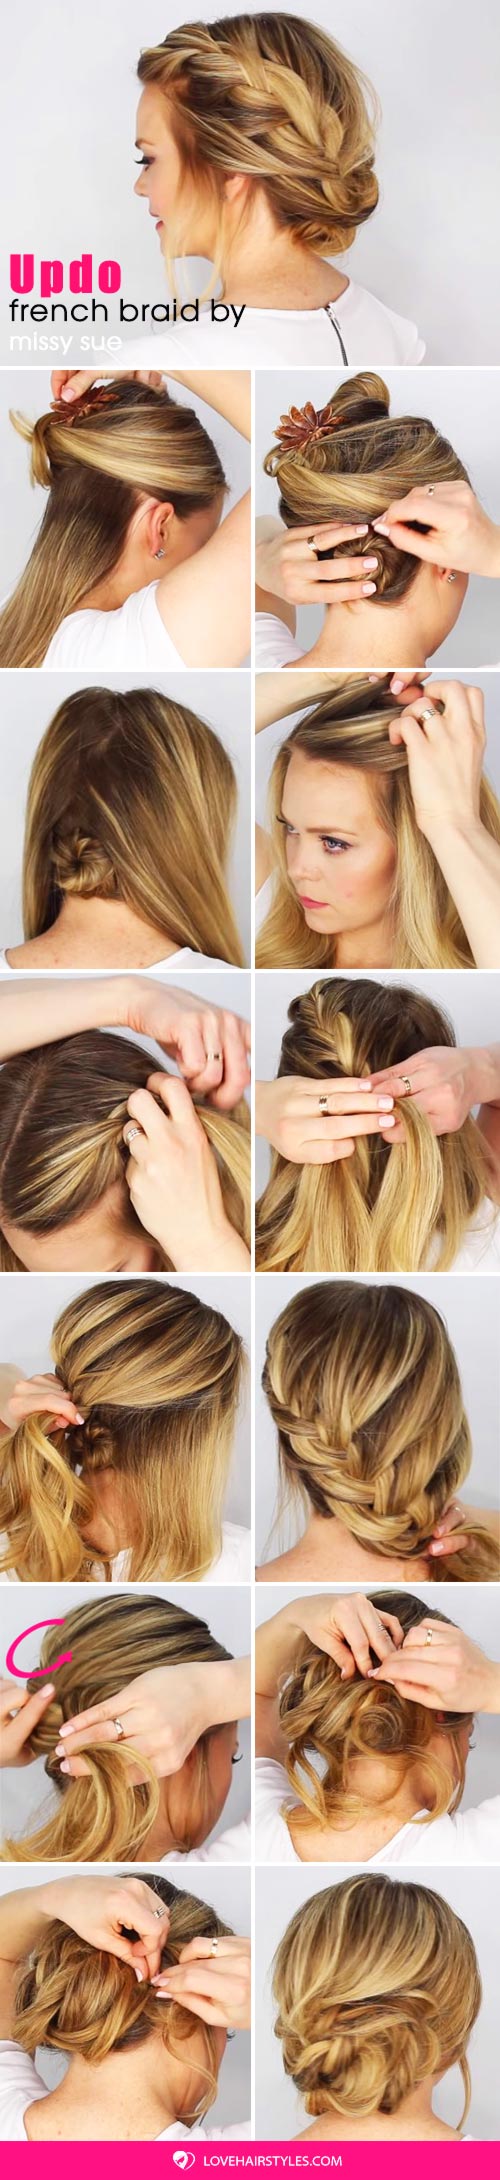 How To French Braid Simple Tutorials | LoveHairStyles.com